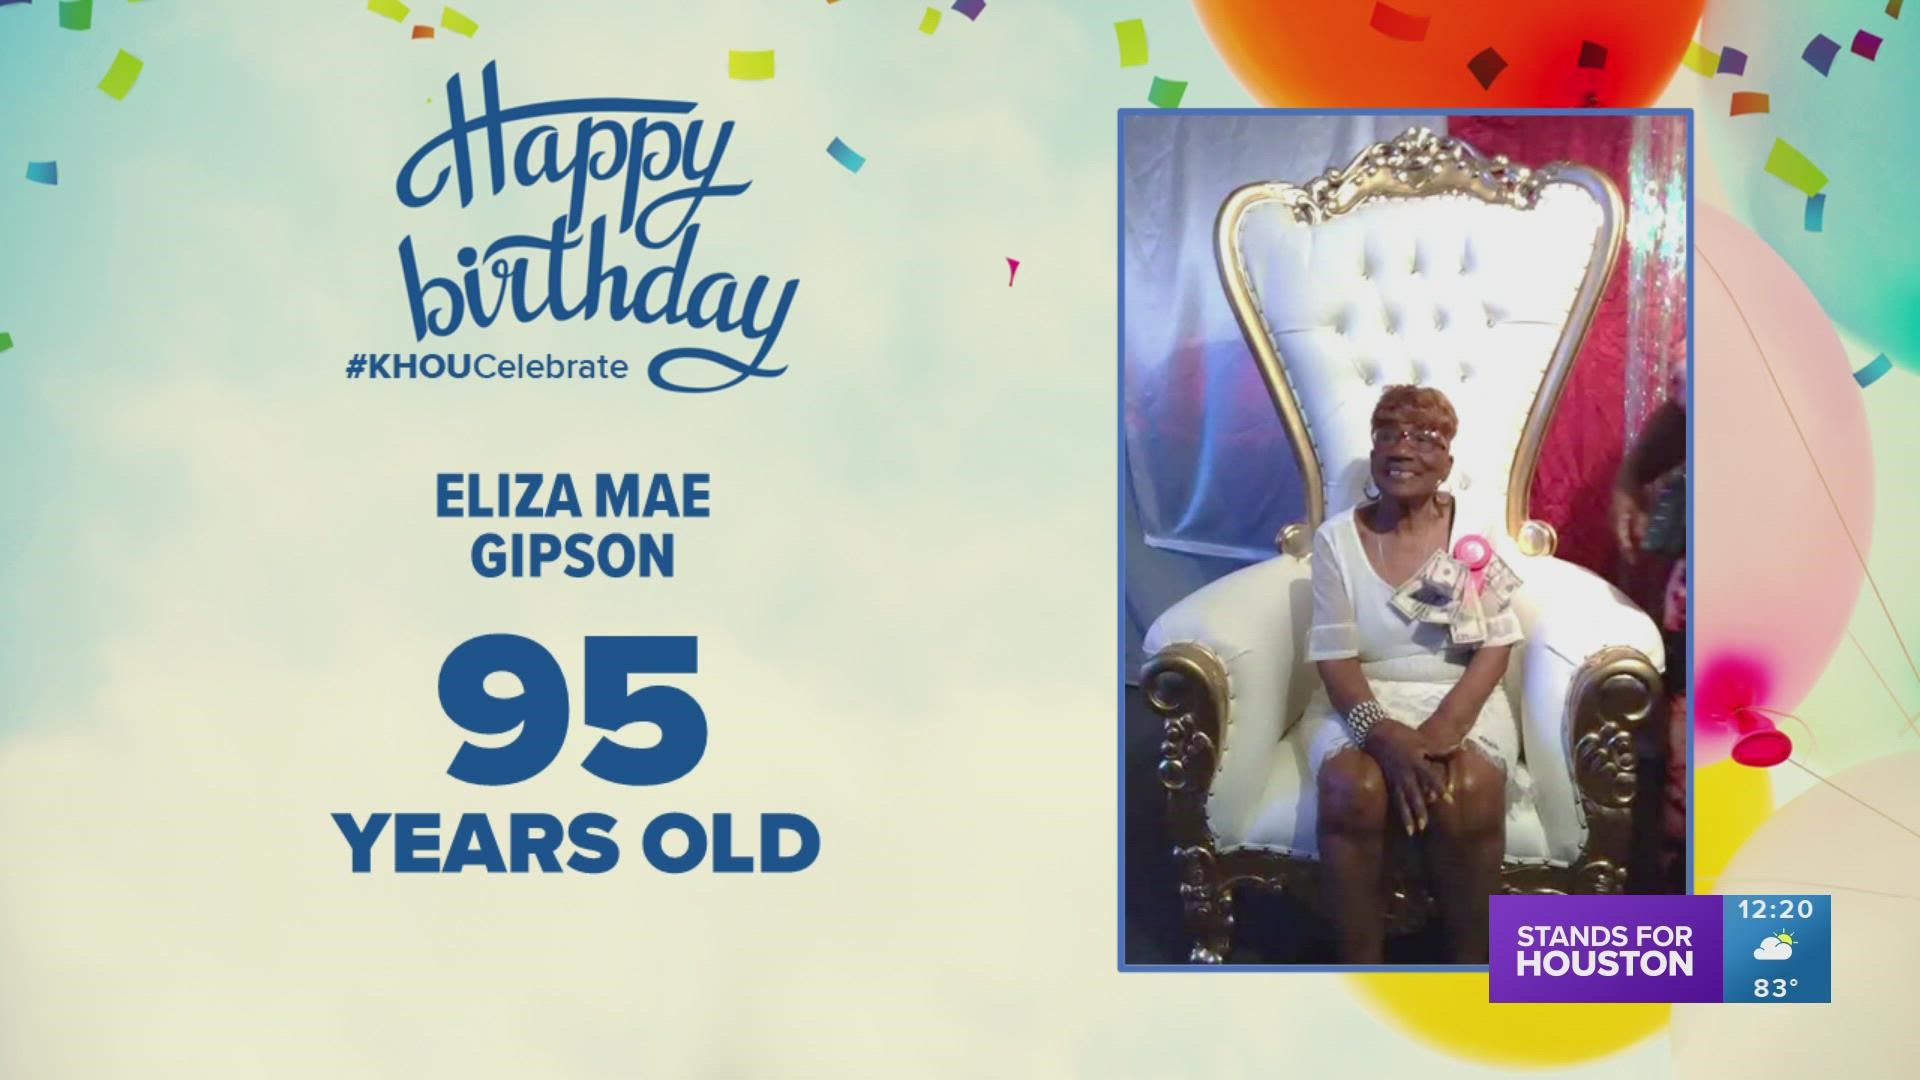 Very special birthday wishes to 95-year-old Eliza Mae Gipson! Happy birthday, queen!